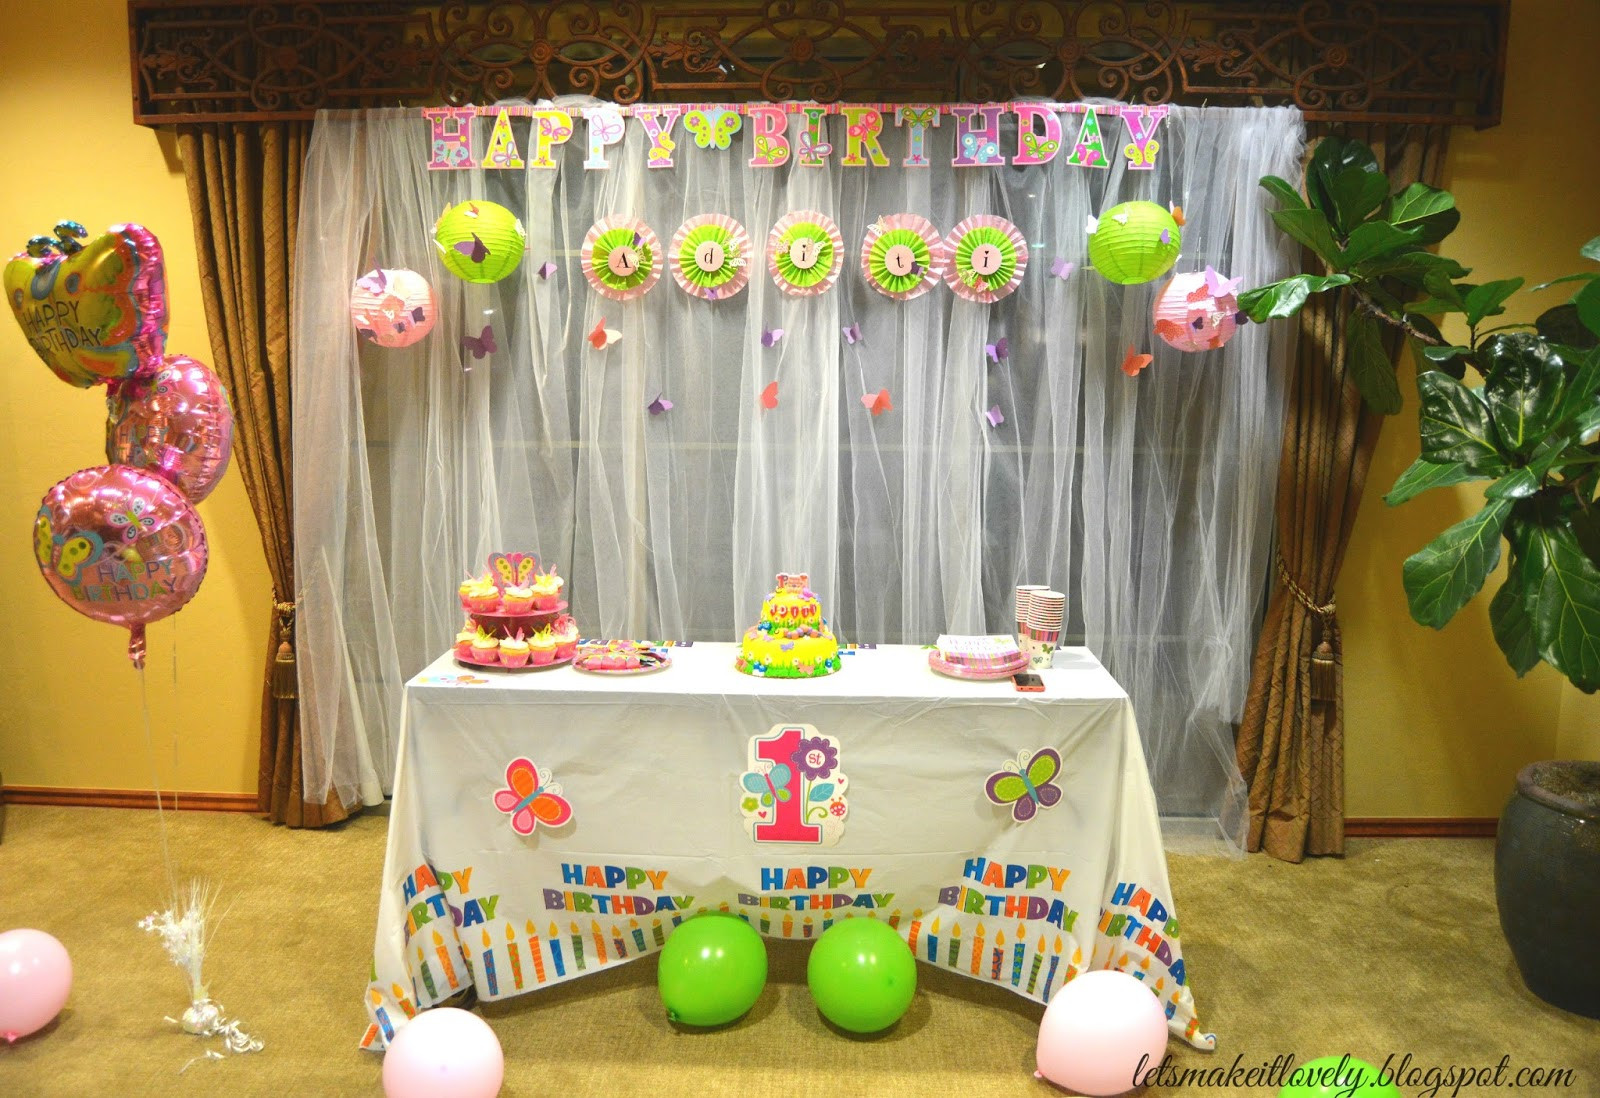 Butterfly Party Decorations DIY
 Let s make it lovely DIY Butterfly Themed Birthday Party